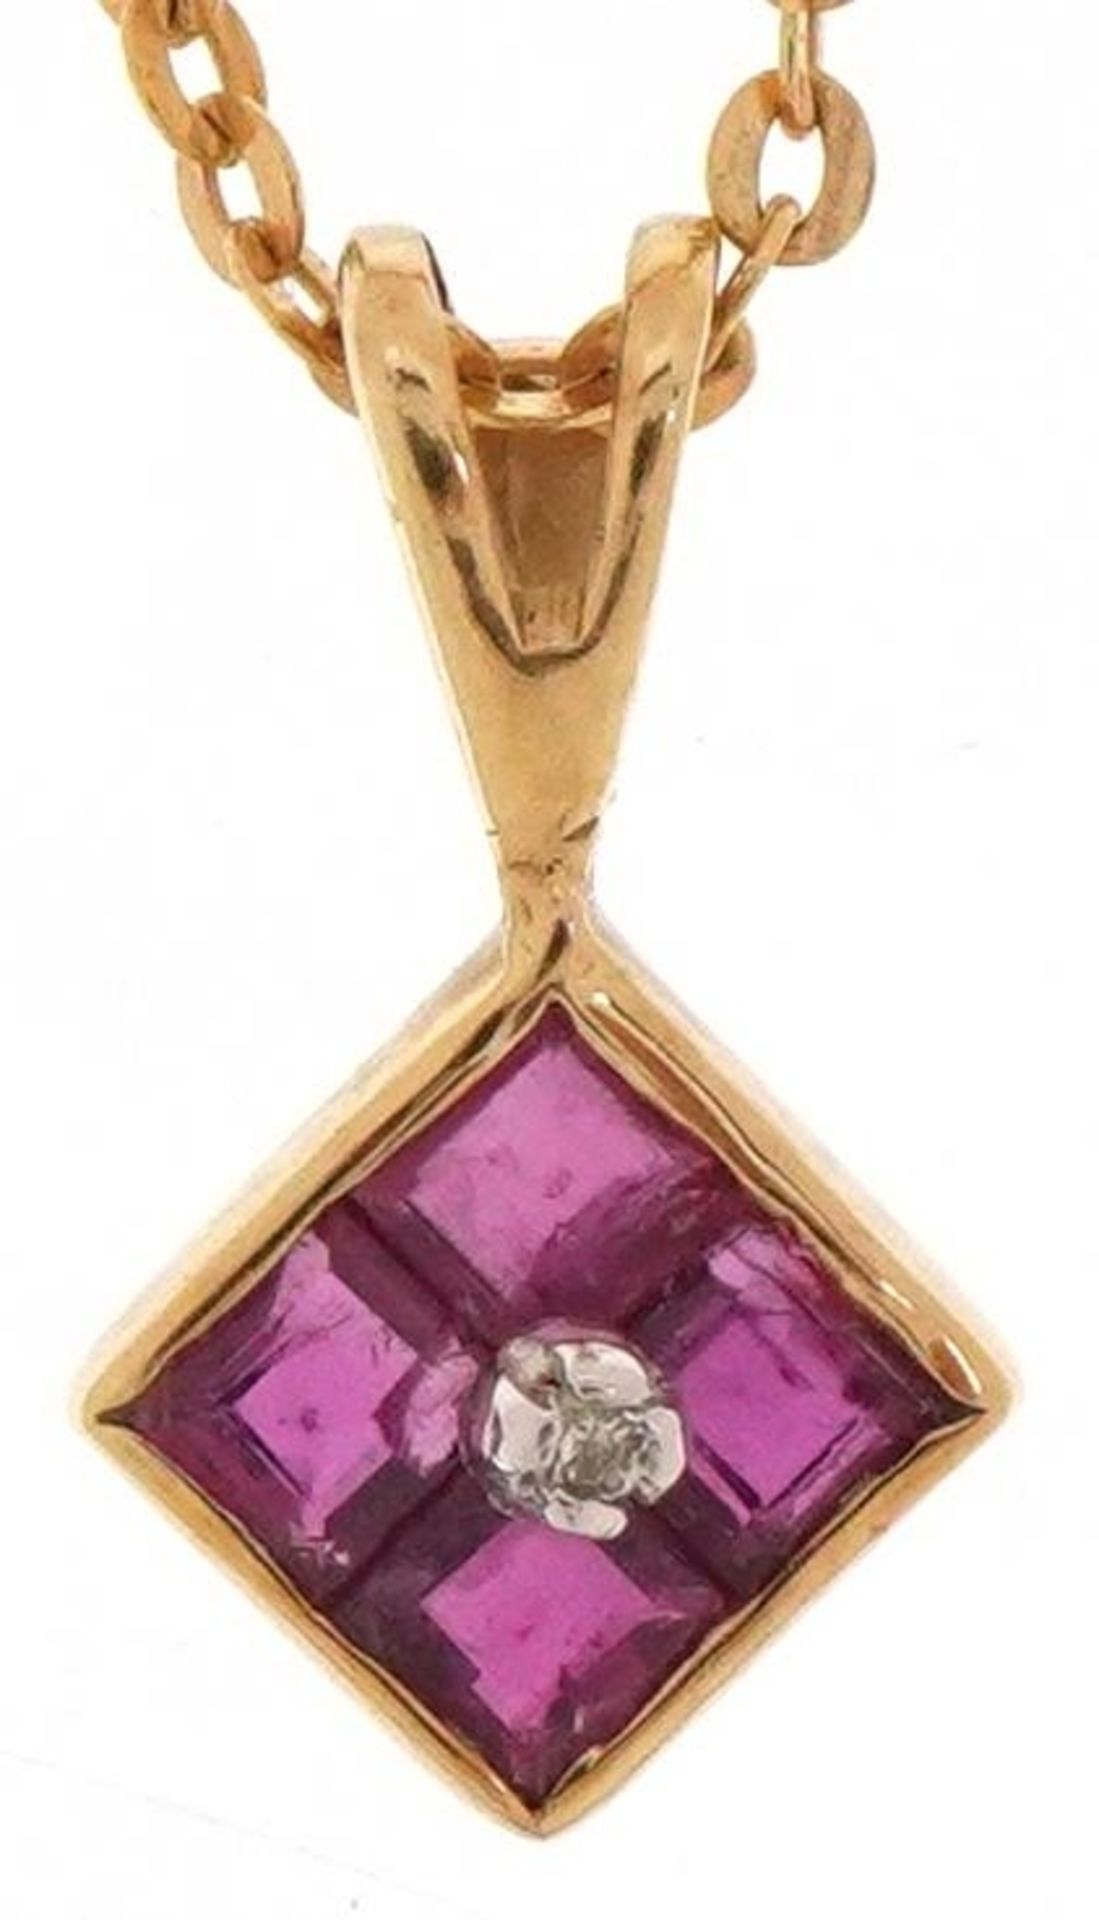 9ct gold pink spinel and diamond pendant on a Italian Unoaerre 14ct gold necklace, 1.3cm high and